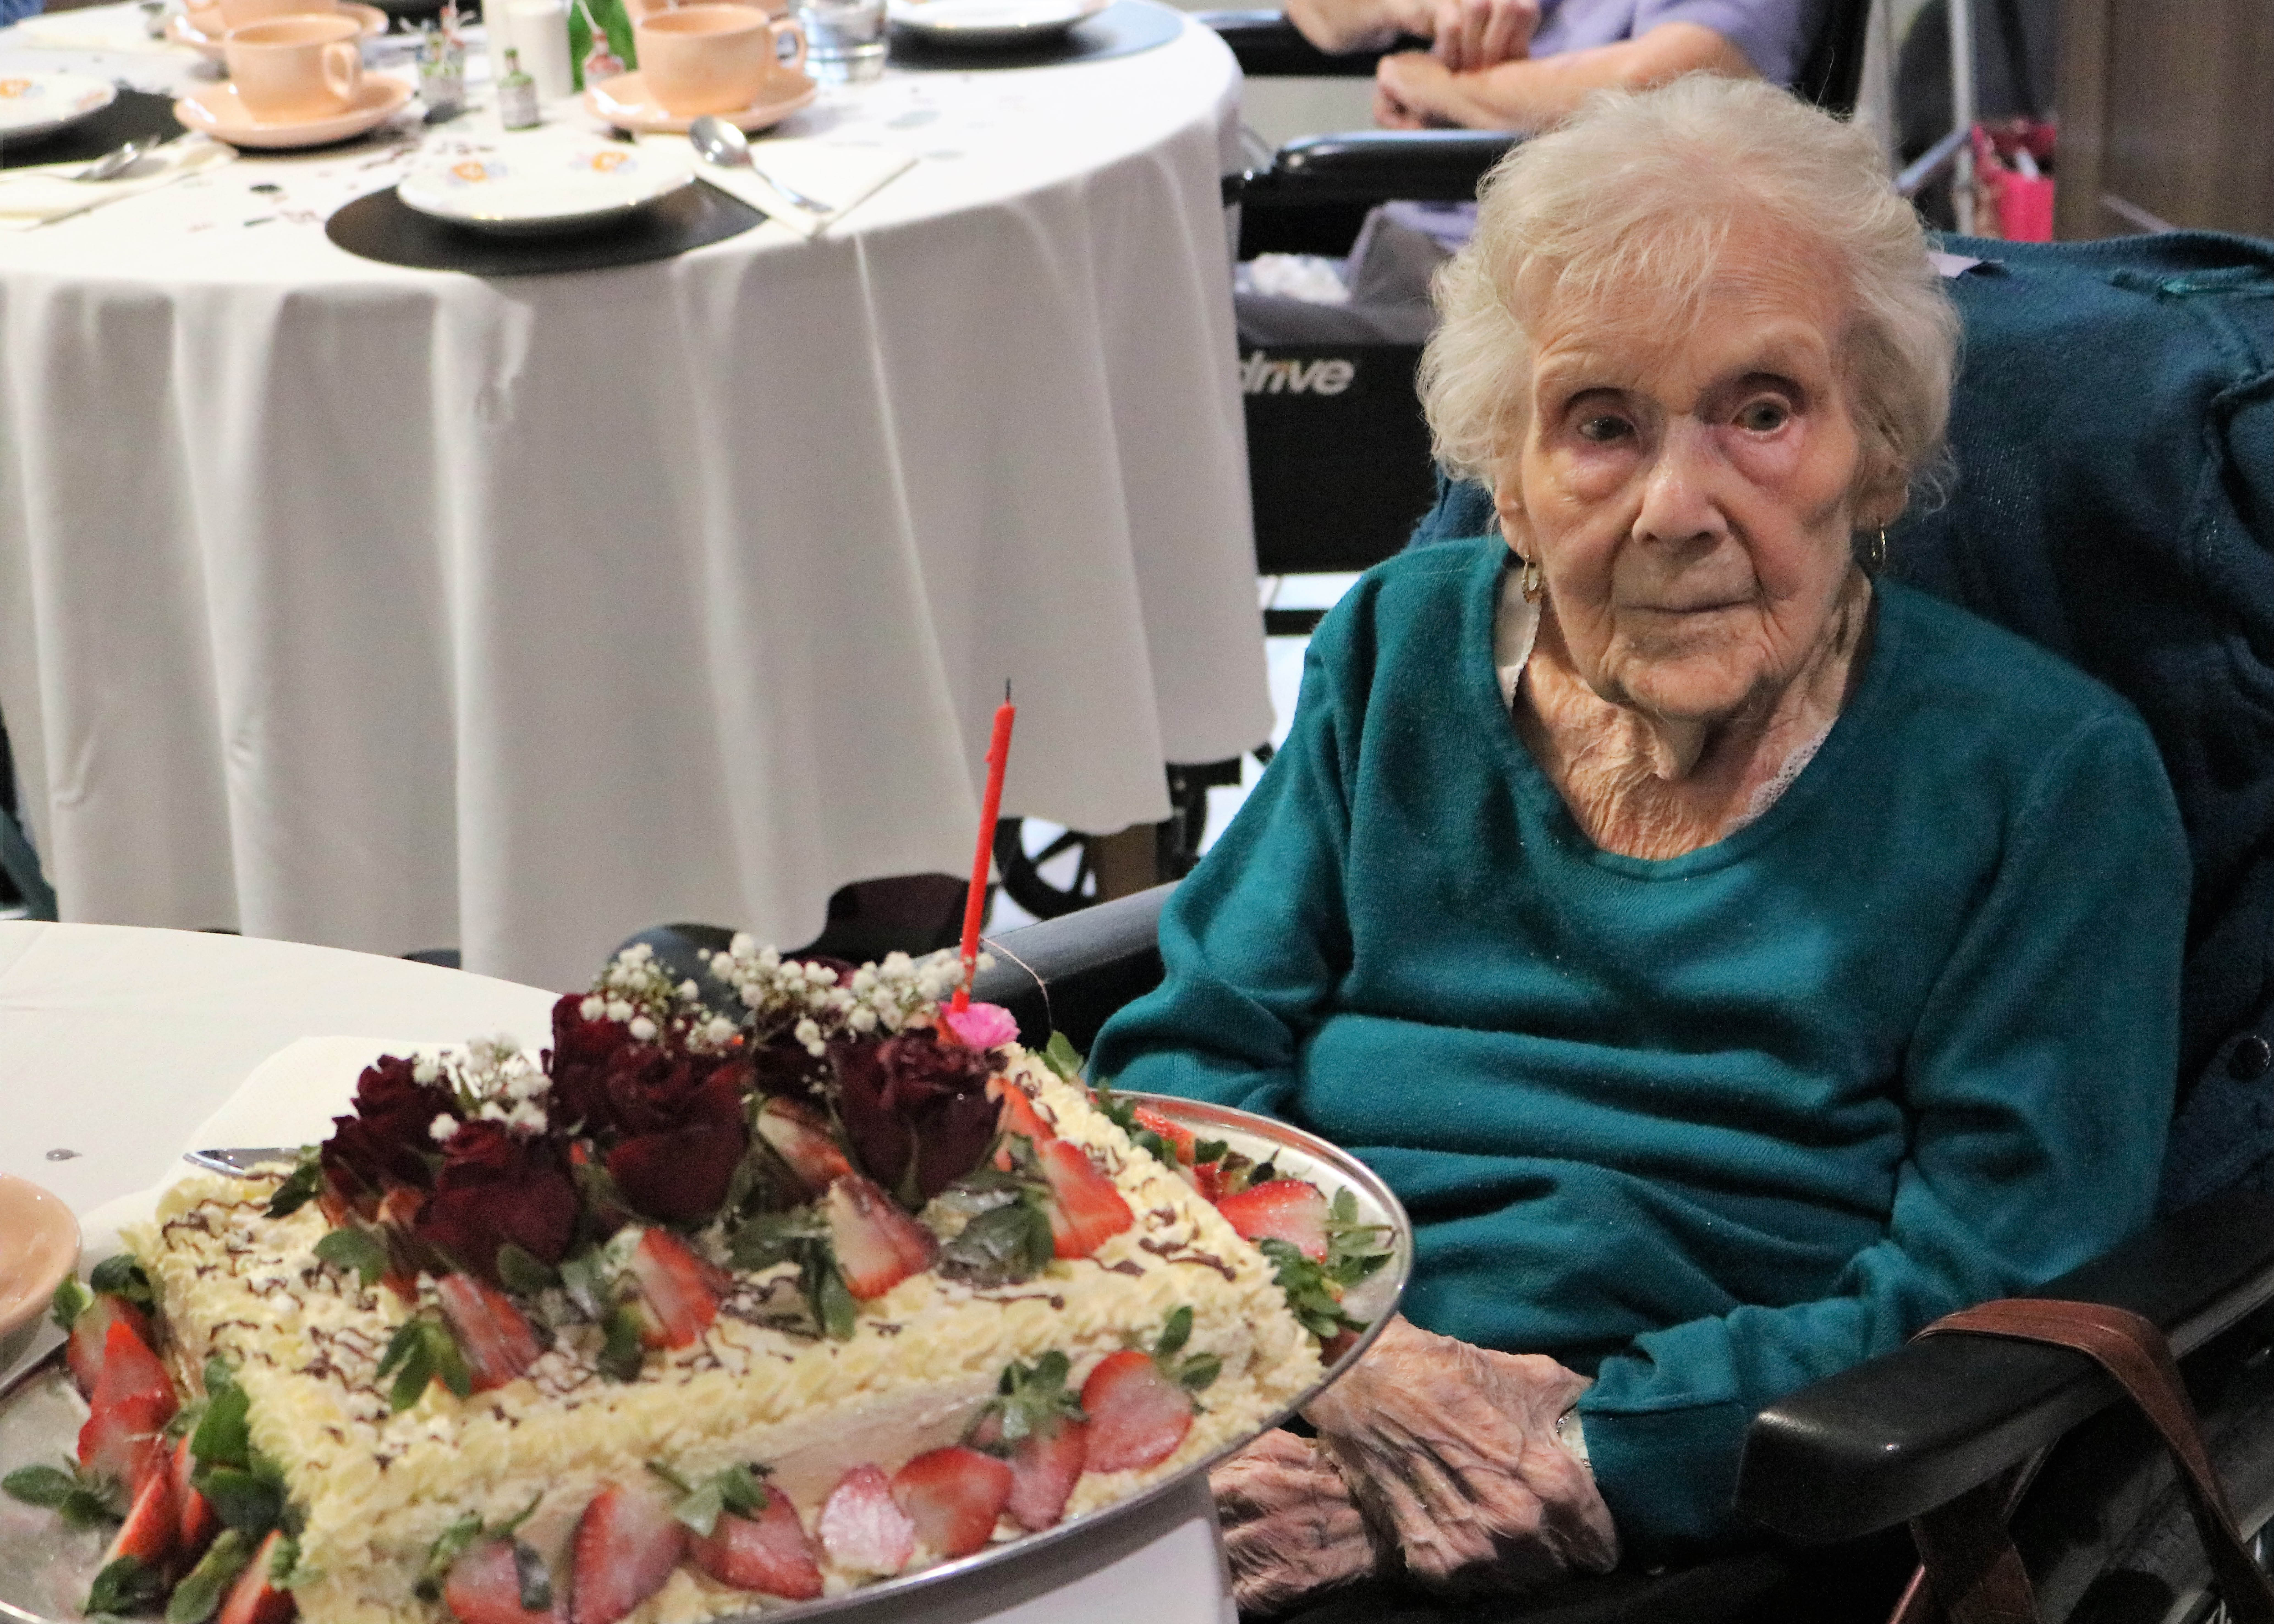 Winifred with her lovely birthday cake made by Caroline Tykot